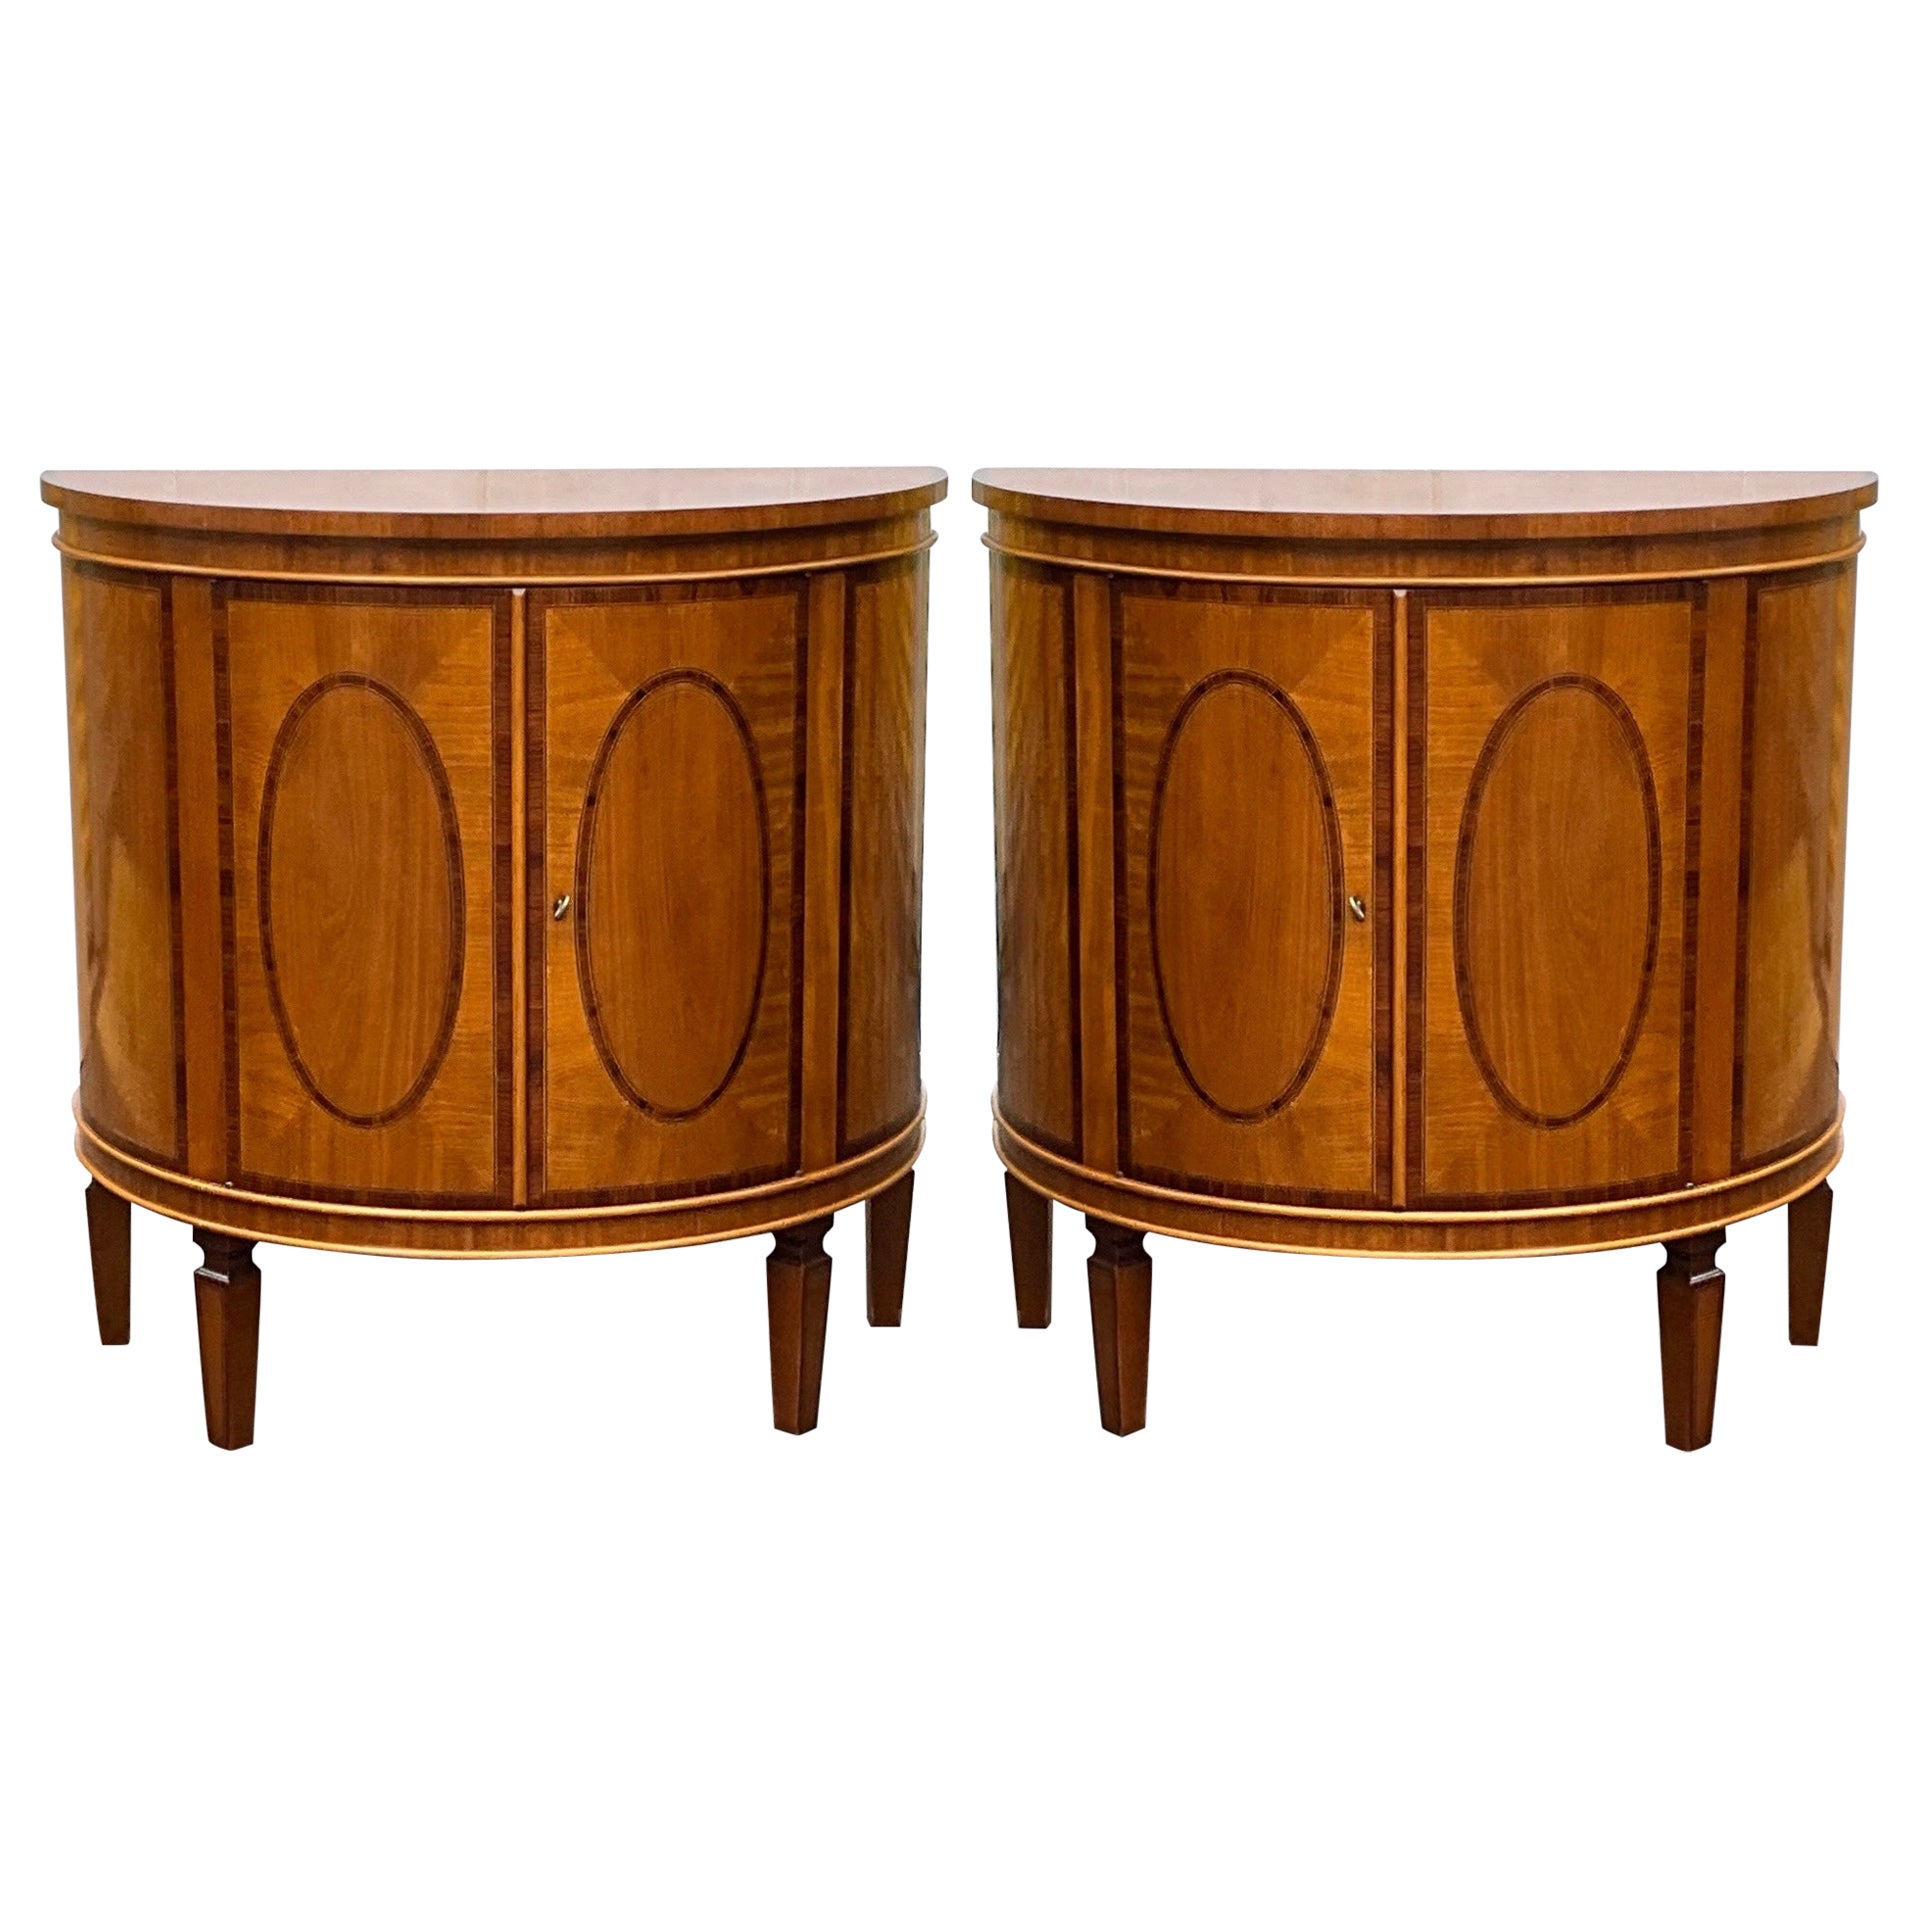 Italian Banded & Inlaid Satinwood Demilune Cabinets Att. Decorative Crafts -Pair For Sale